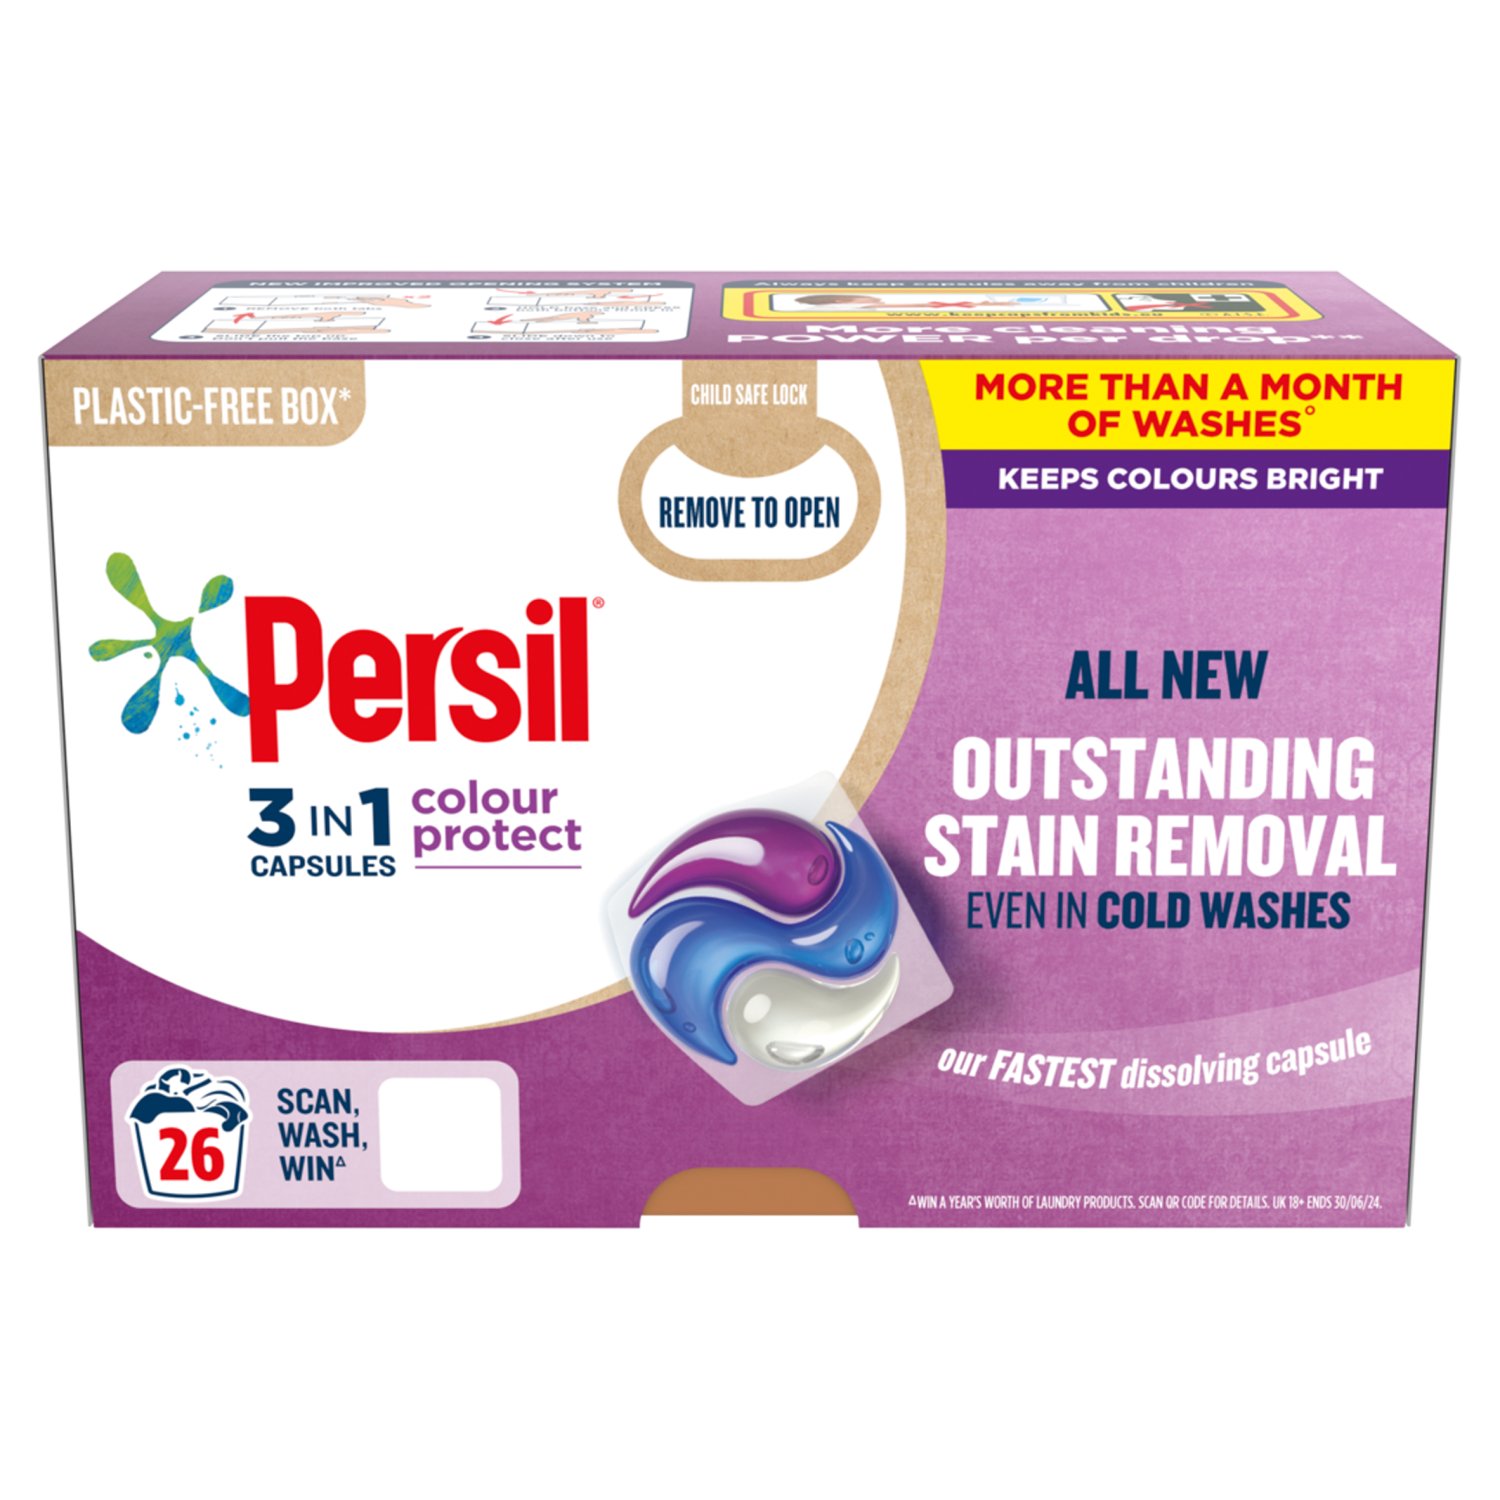 Persil 3 in 1 Colour Capsules 26 Washes (700 g)